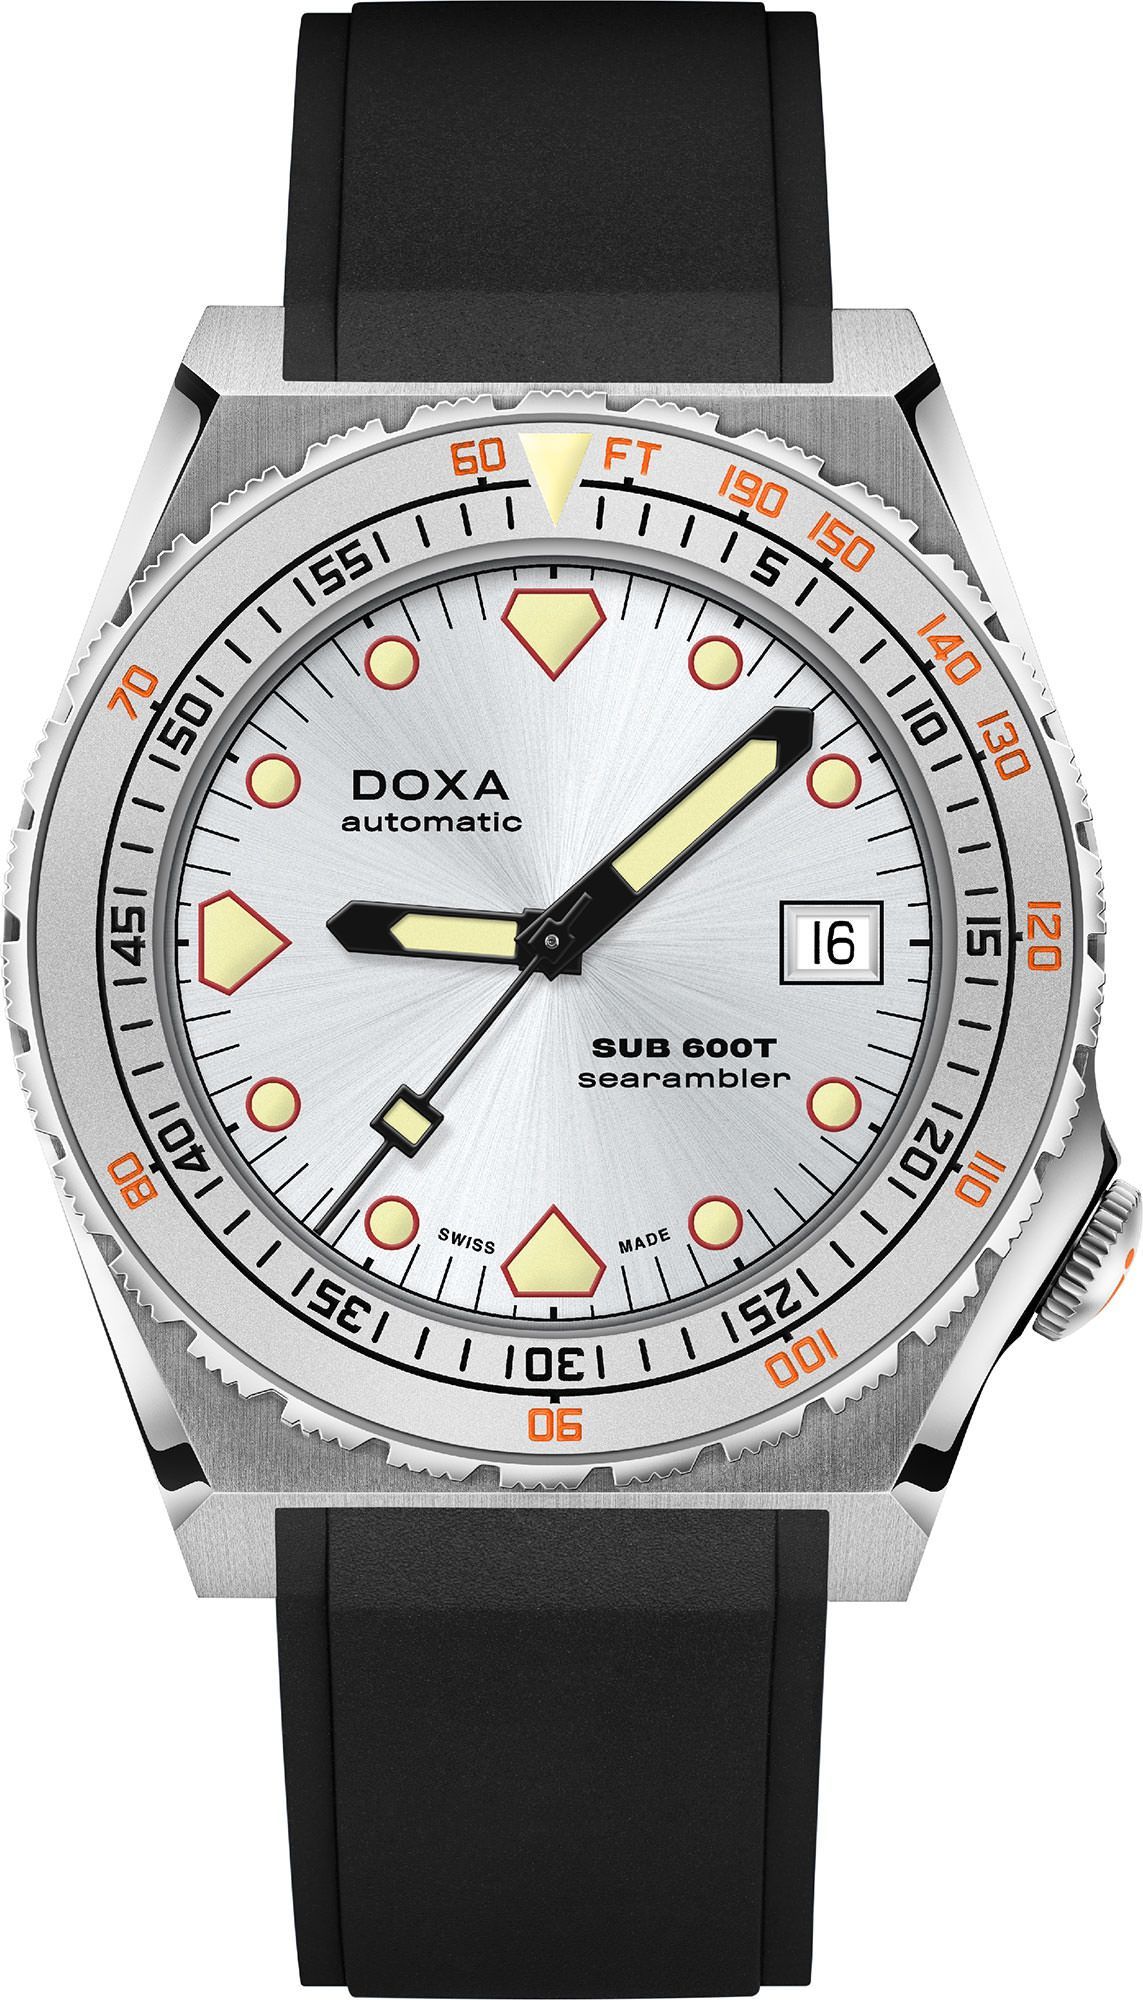 Doxa SUB 600T Searambler Silver Dial 40 mm Automatic Watch For Men - 1